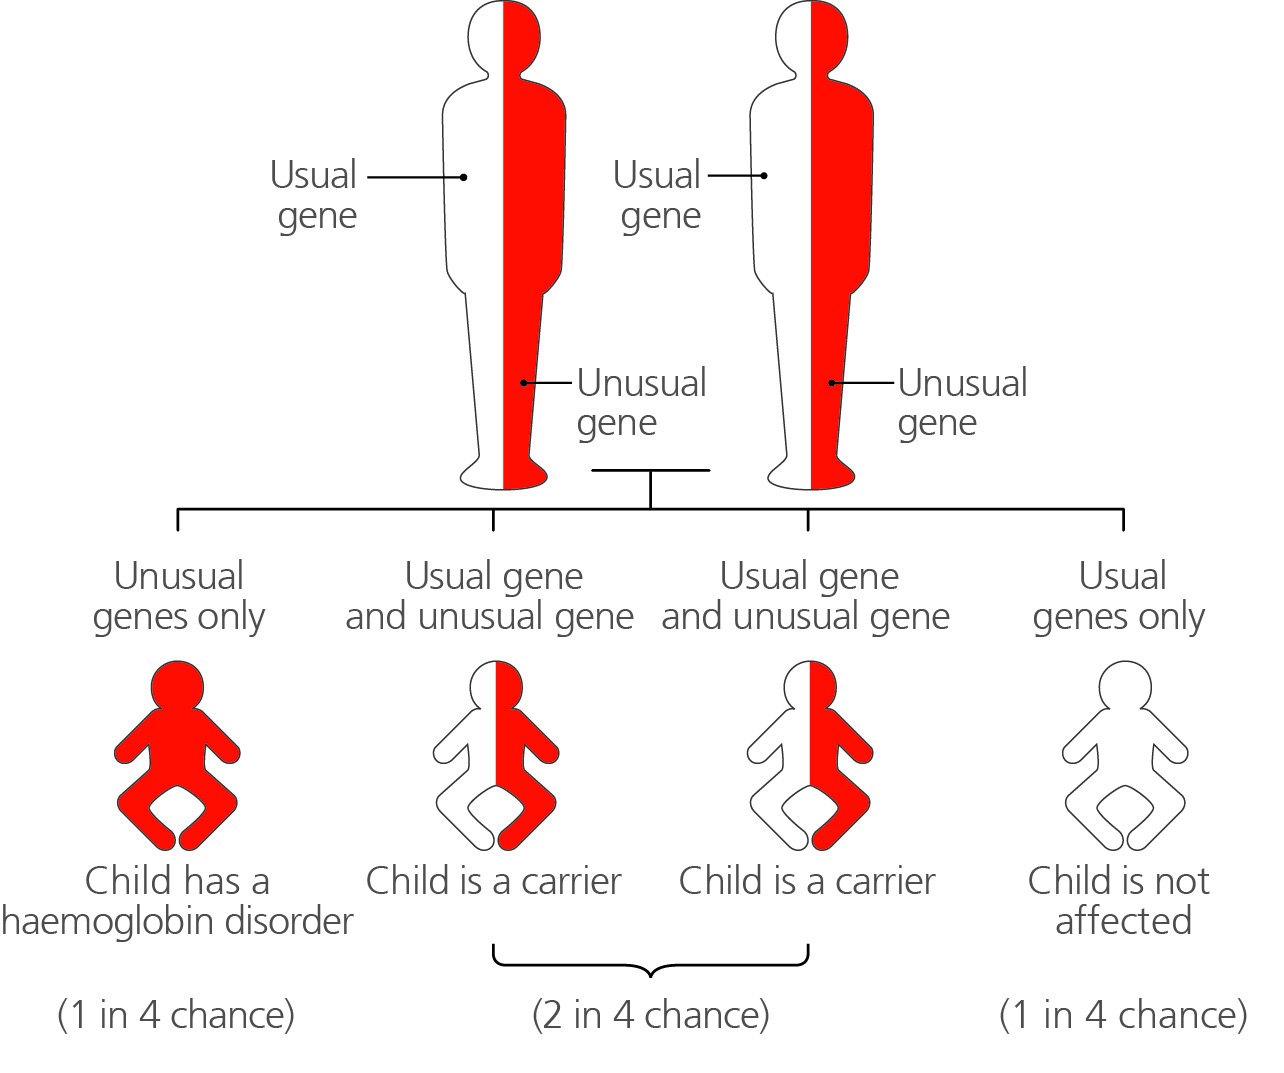 A diagram showing the chance of inheriting a condition based on the parents' genes. If both parents are carriers there is a 1 in 4 chance the child has a haemoglobin disorder, a 2 in 4 chance the child is a carrier, and a 1 in 4 chance the child is not affected.